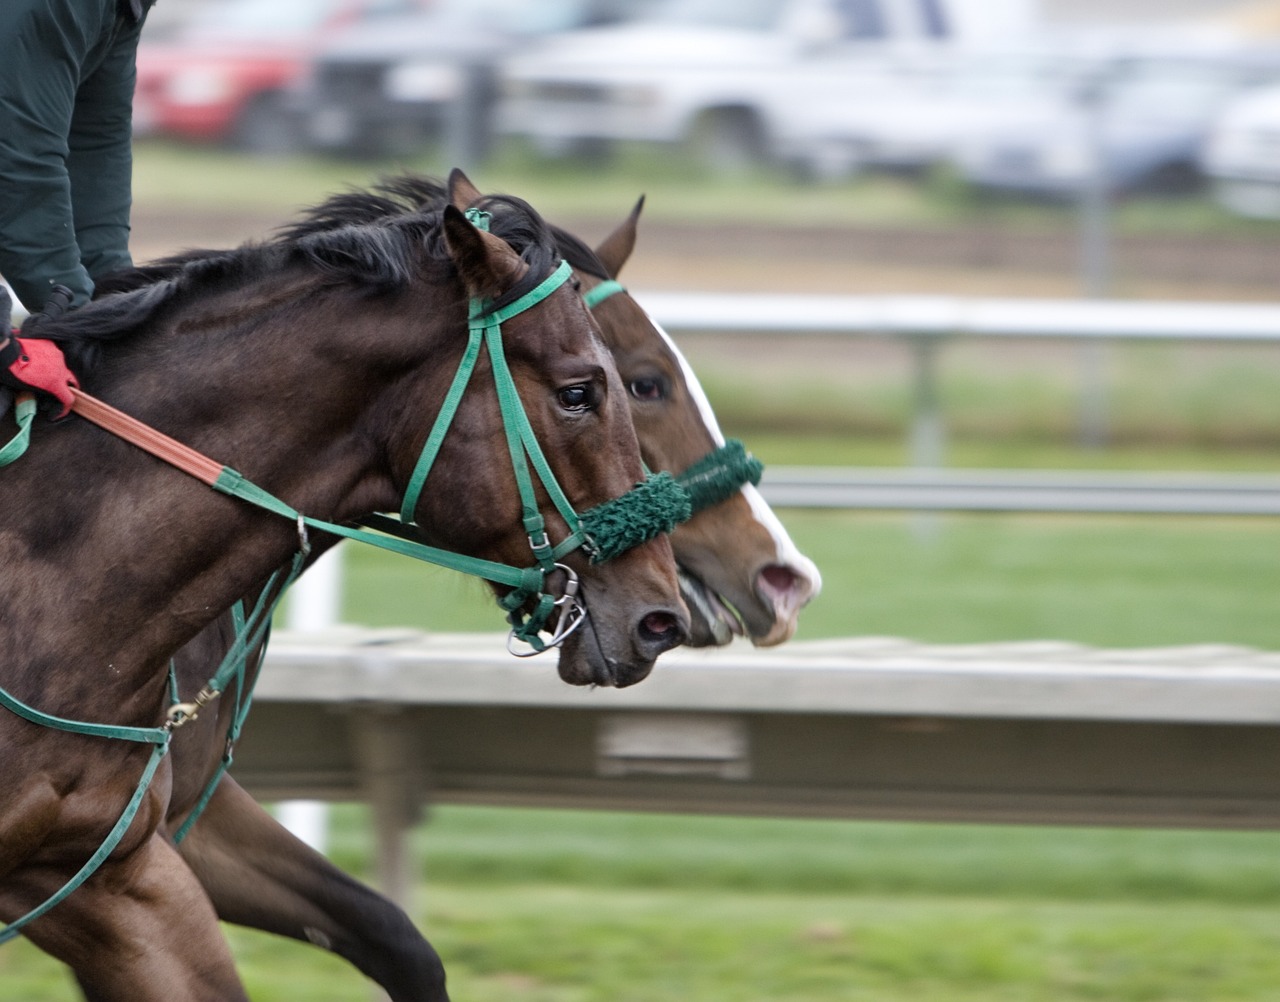 Heads of two horses running on racetrack.